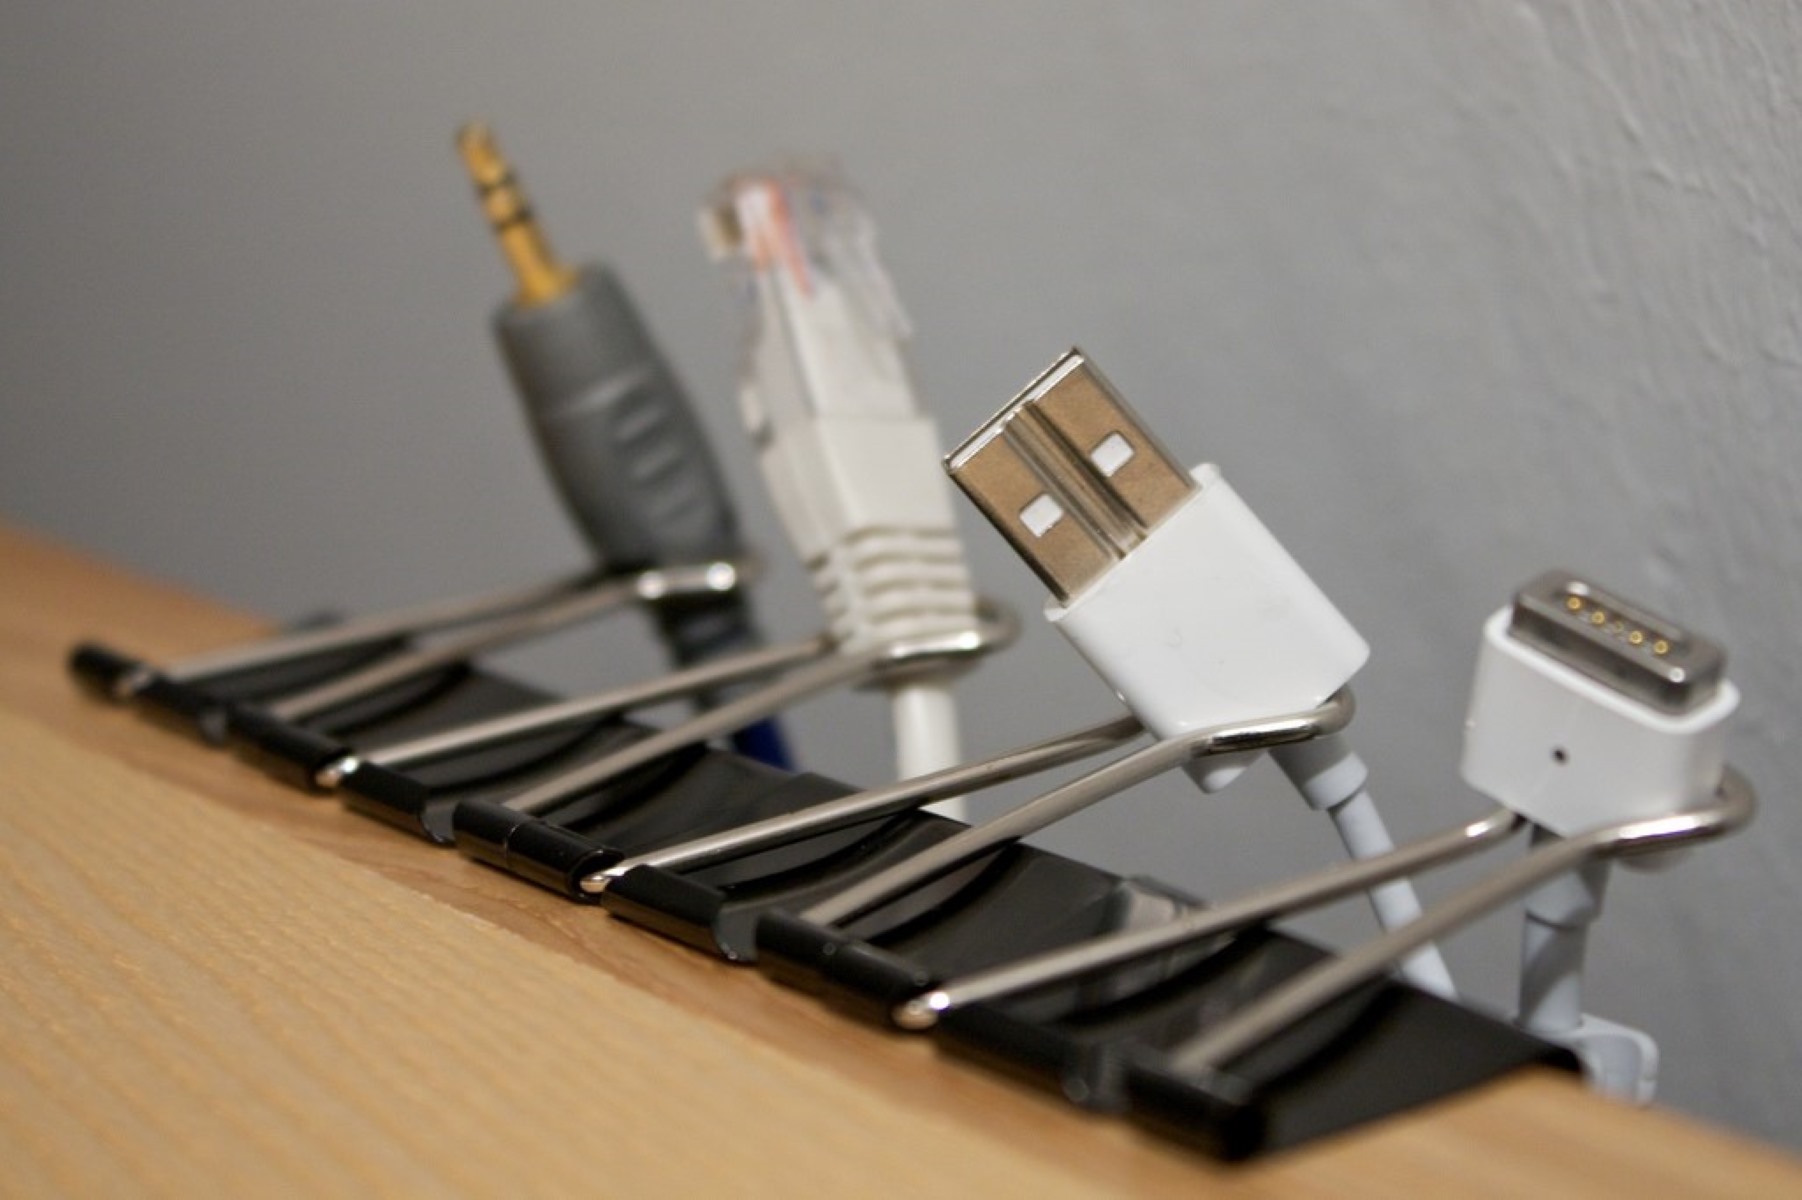 How To Organize Cords On Desk